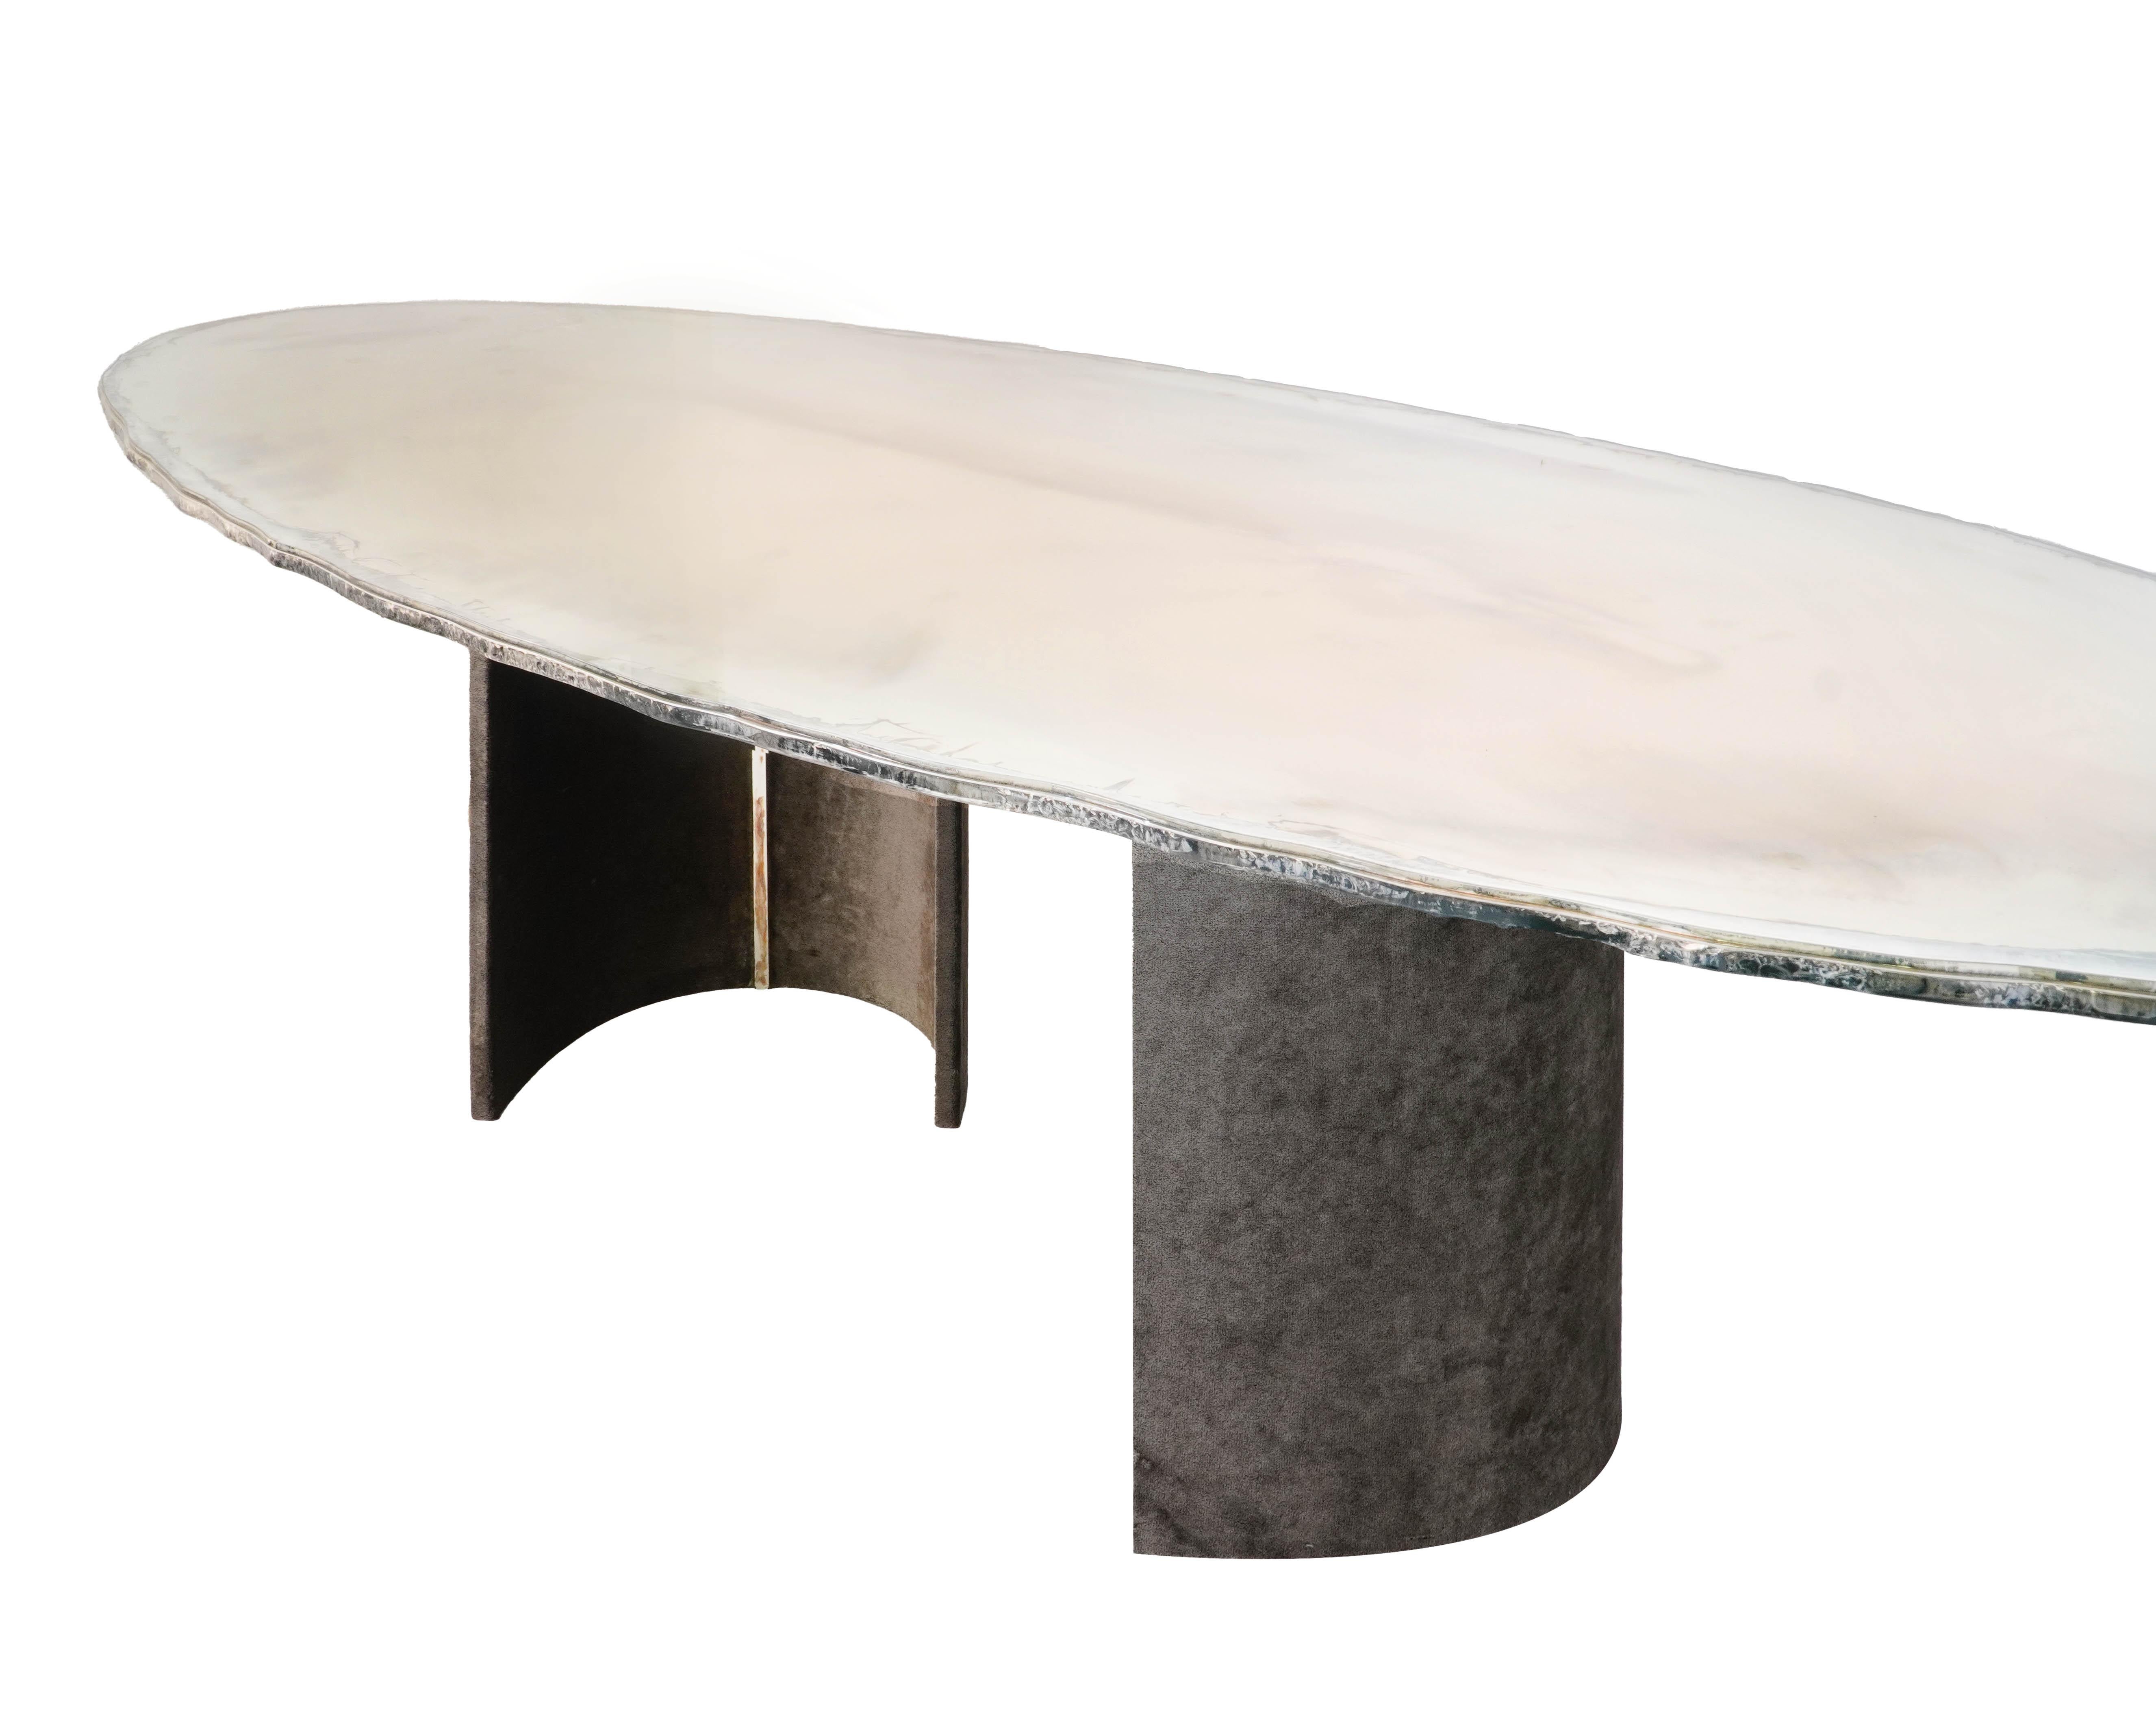 Italian Gem, Contemporary Dining Table 280 Silvered Glass Top, Pair of Velvety Legs For Sale